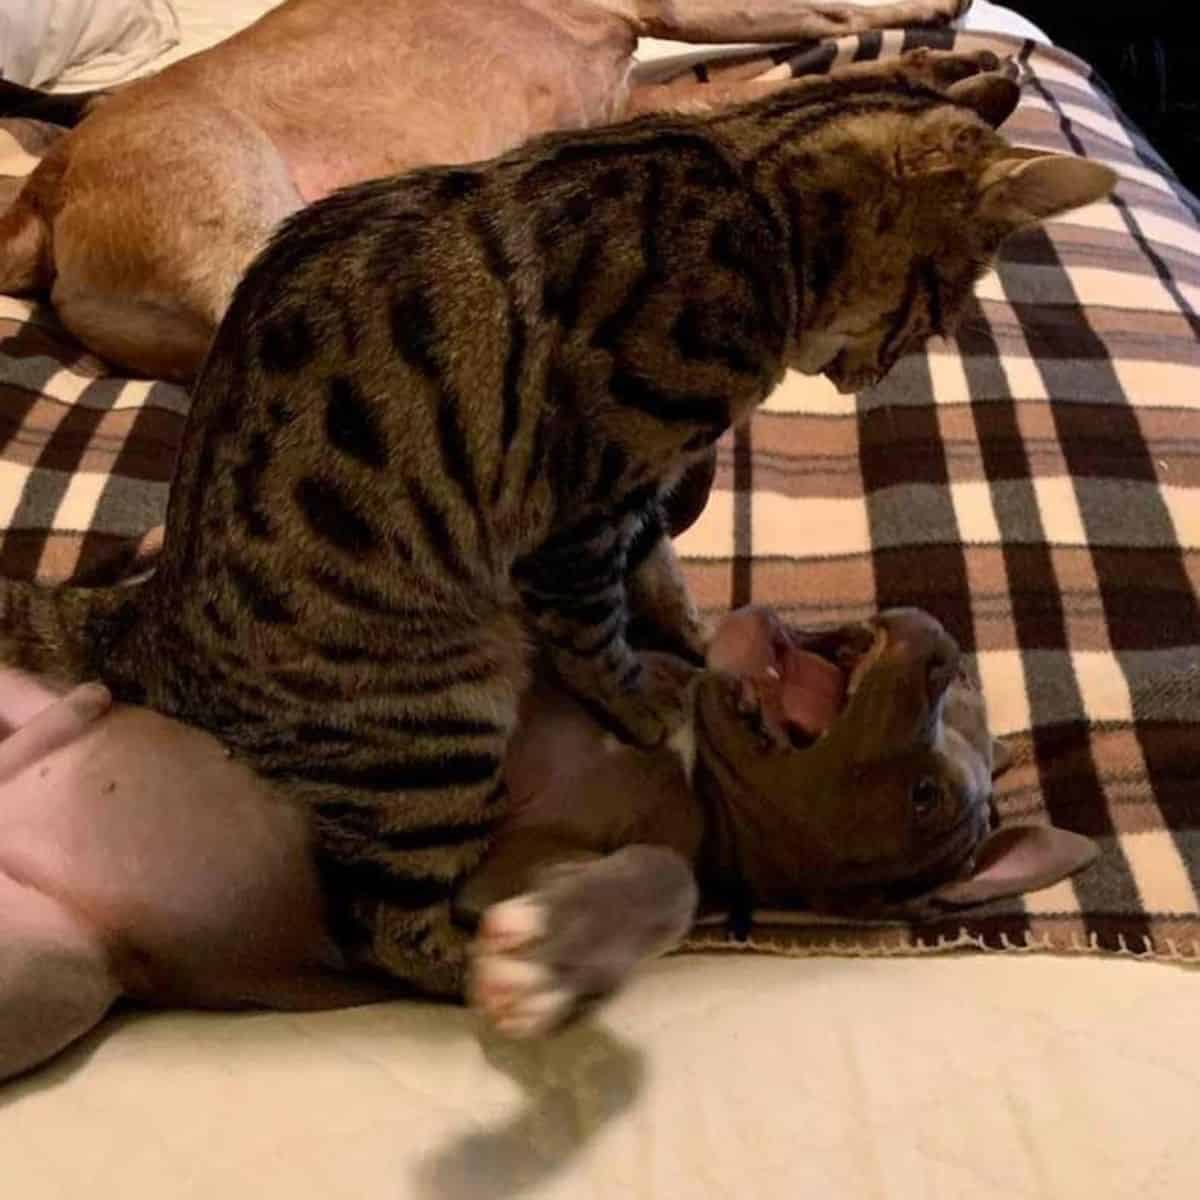 cat attacking the dog